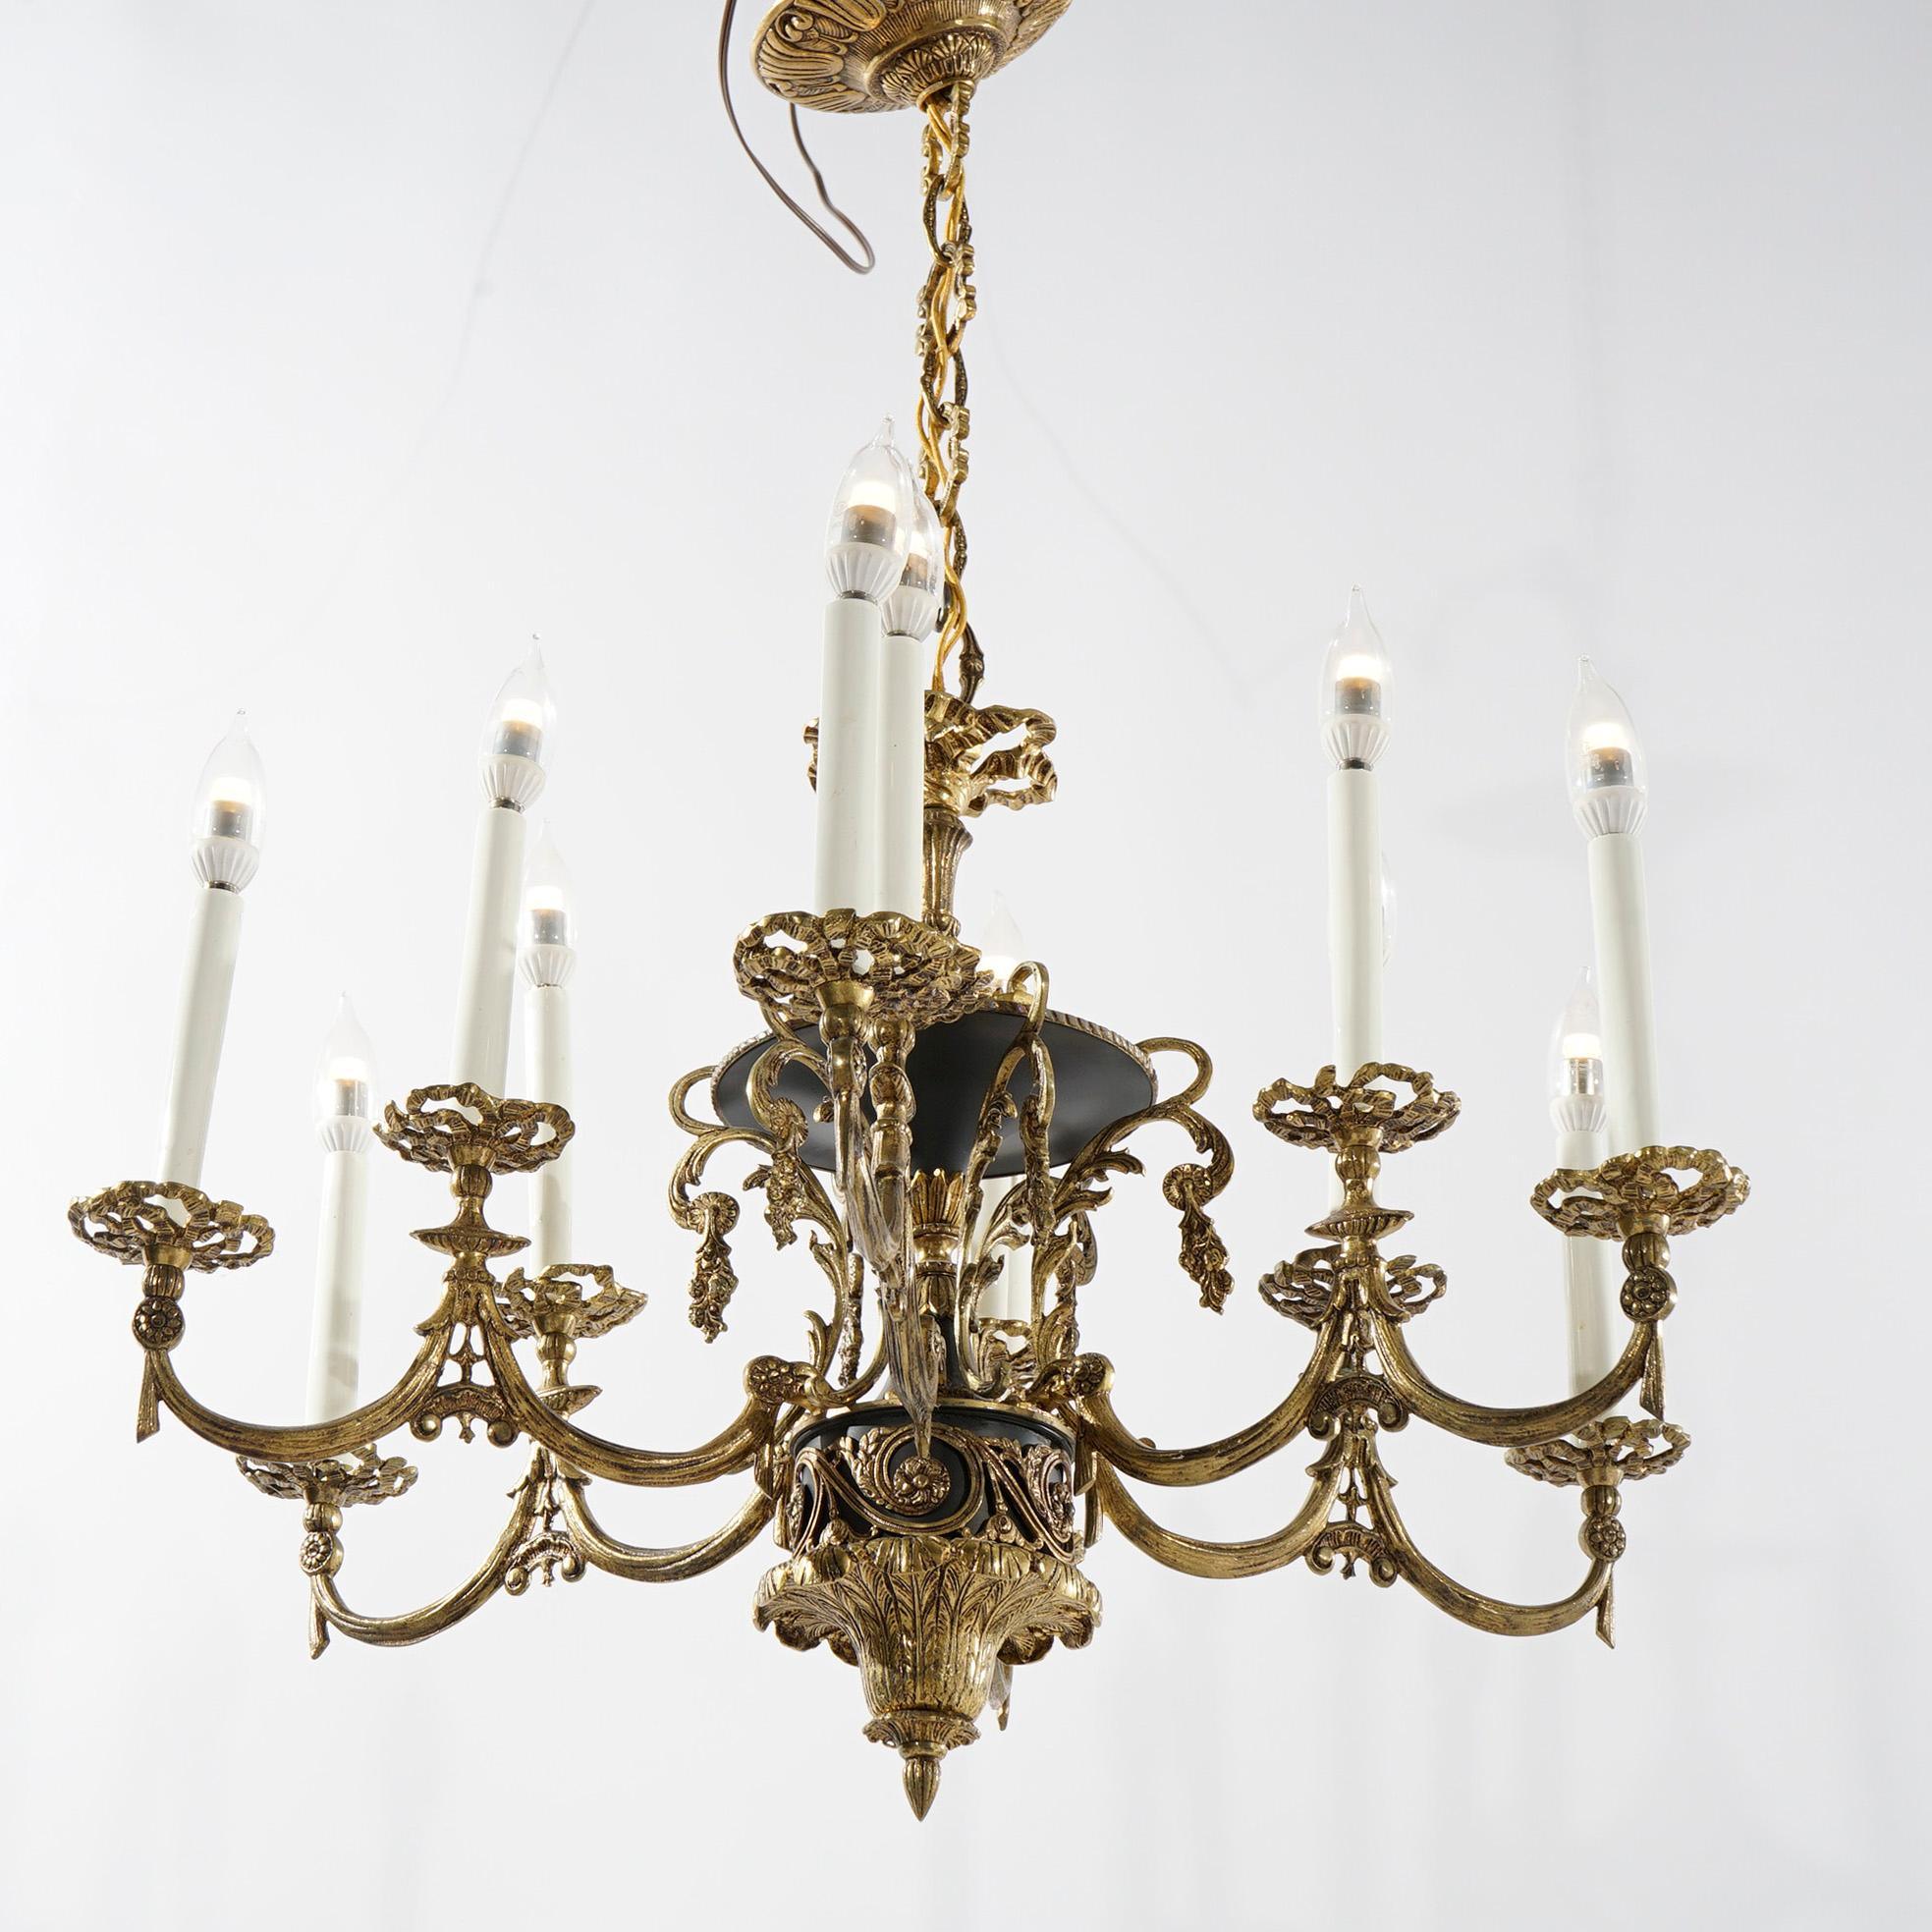 20th Century Antique French Empire Style Ebonized Bronze Twelve-Light Chandelier, Early 20thC For Sale